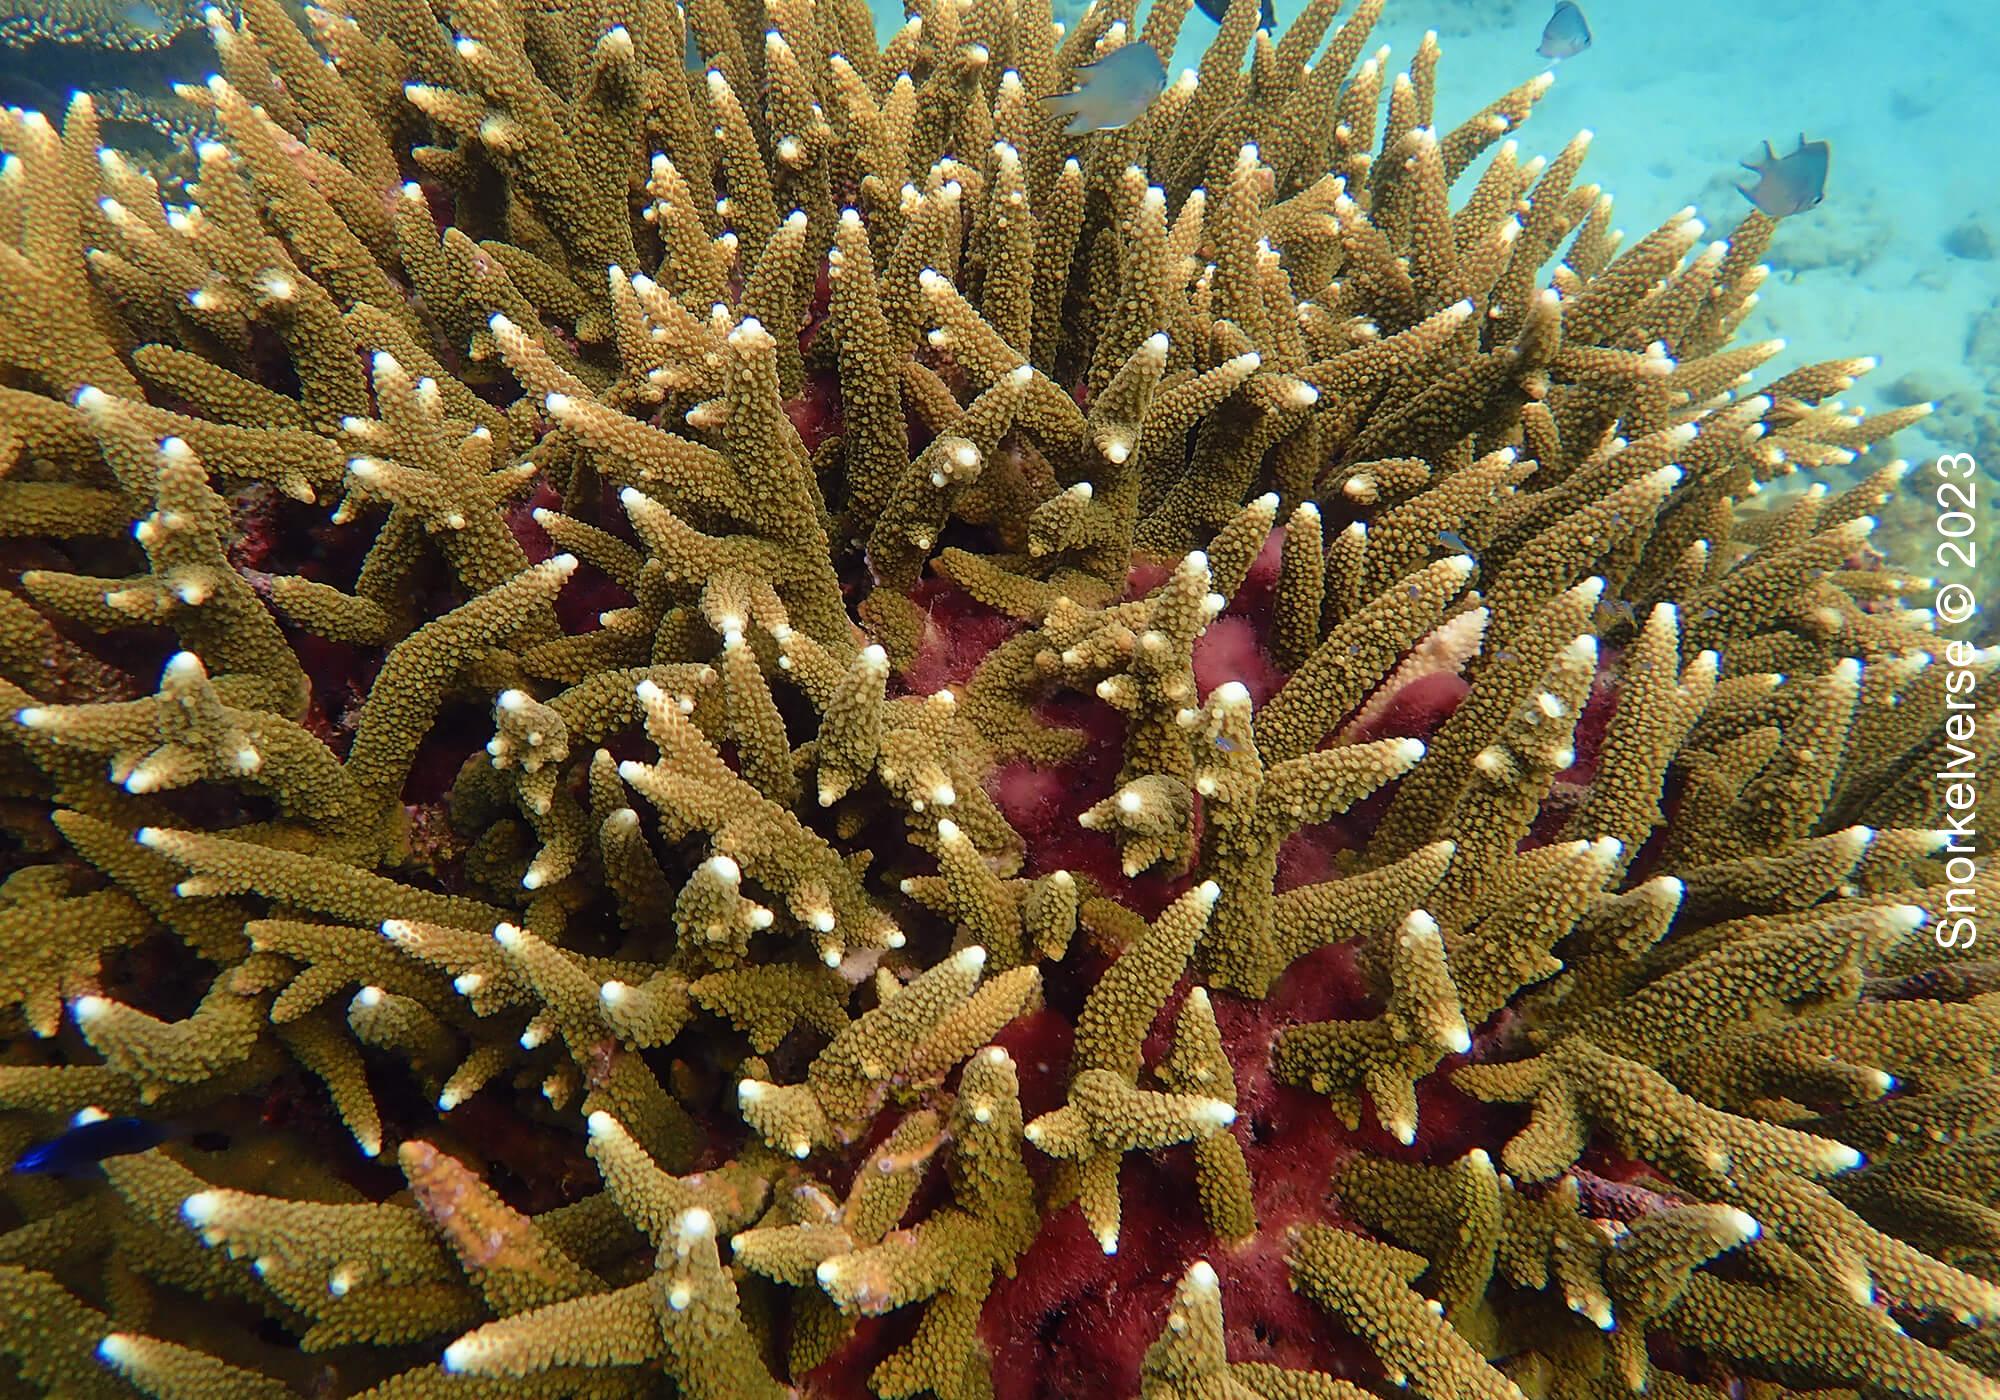 Staghorn Branch Coral, Loh Lana Bay, Phi Phi Islands, Thailand